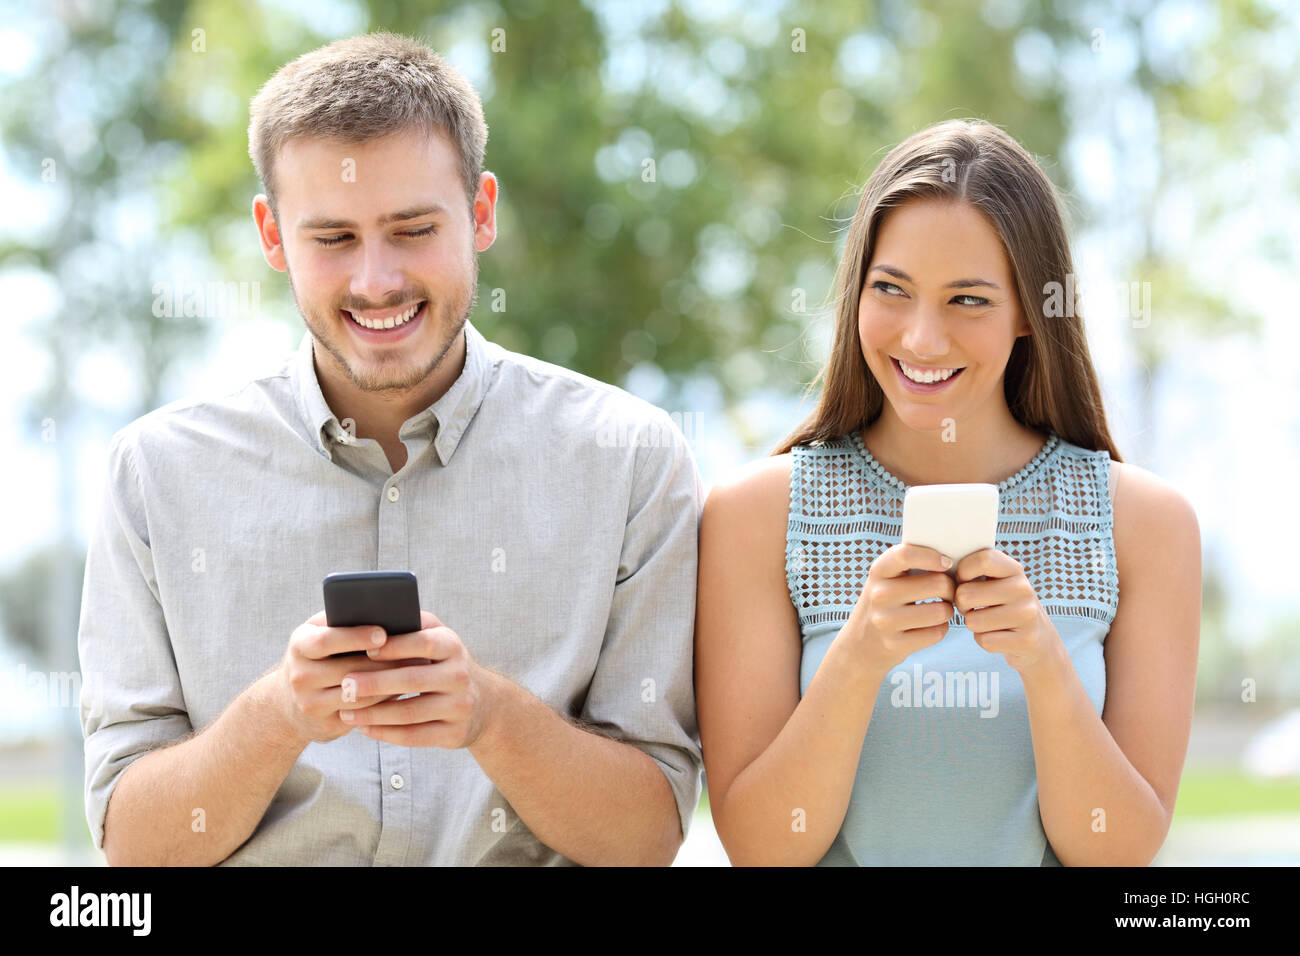 Front view of a couple or friends using smart phones and looking each other askance Stock Photo